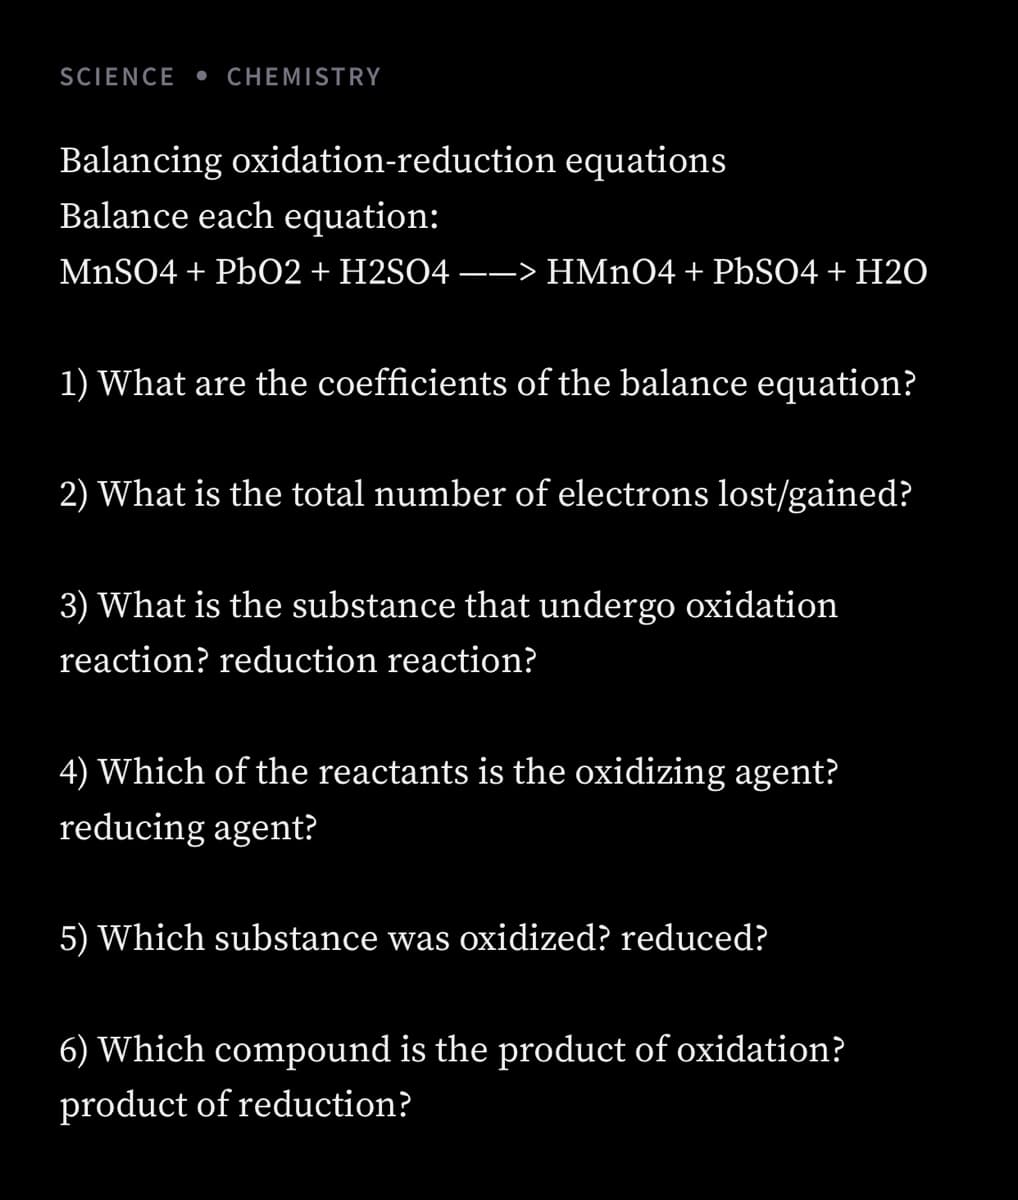 SCIENCE
• CHEMISTRY
Balancing oxidation-reduction equations
Balance each equation:
MNSO4 + Pb02 + H2SO4 –-> HMNO4 + PBSO4 + H20
1) What are the coefficients of the balance equation?
2) What is the total number of electrons lost/gained?
3) What is the substance that undergo oxidation
reaction? reduction reaction?
4) Which of the reactants is the oxidizing agent?
reducing agent?
5) Which substance was oxidized? reduced?
6) Which compound is the product of oxidation?
product of reduction?
